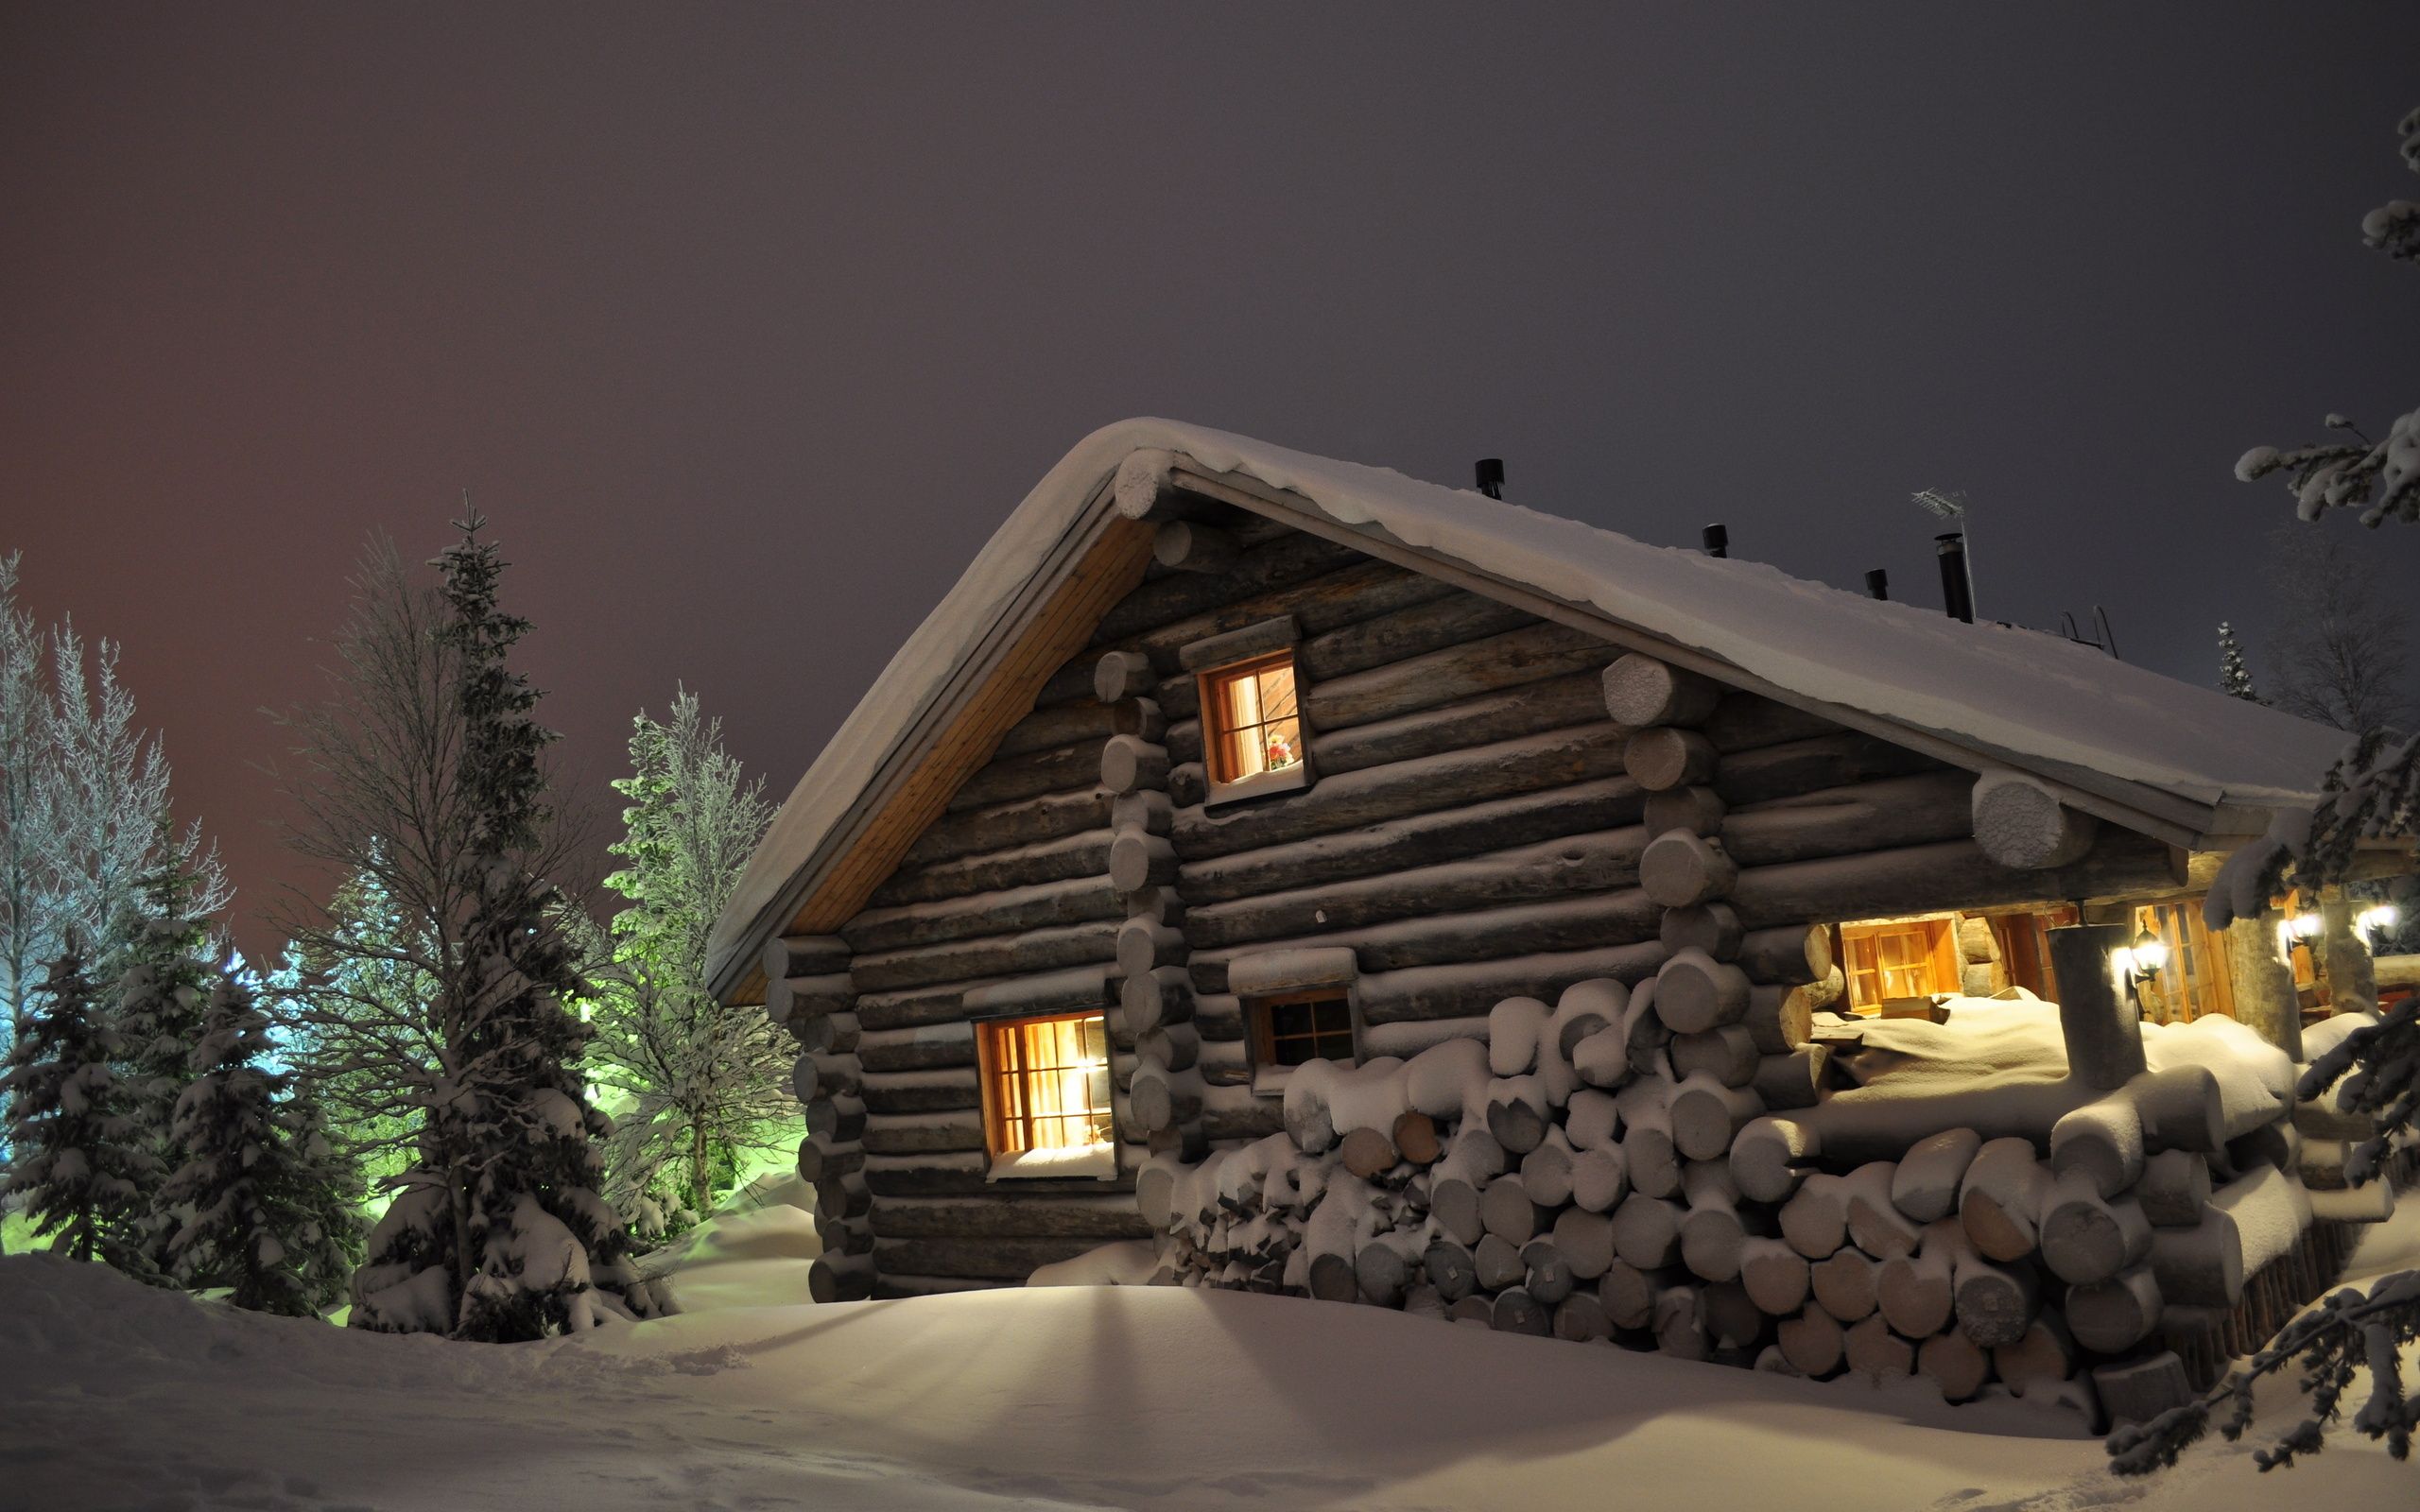 Wallpaper winter, snow drifts, log cabin, wood, night eating, winter, large 2560x1600 on the desktop, picture, 3D wallp. Winter house, Cabins and cottages, House